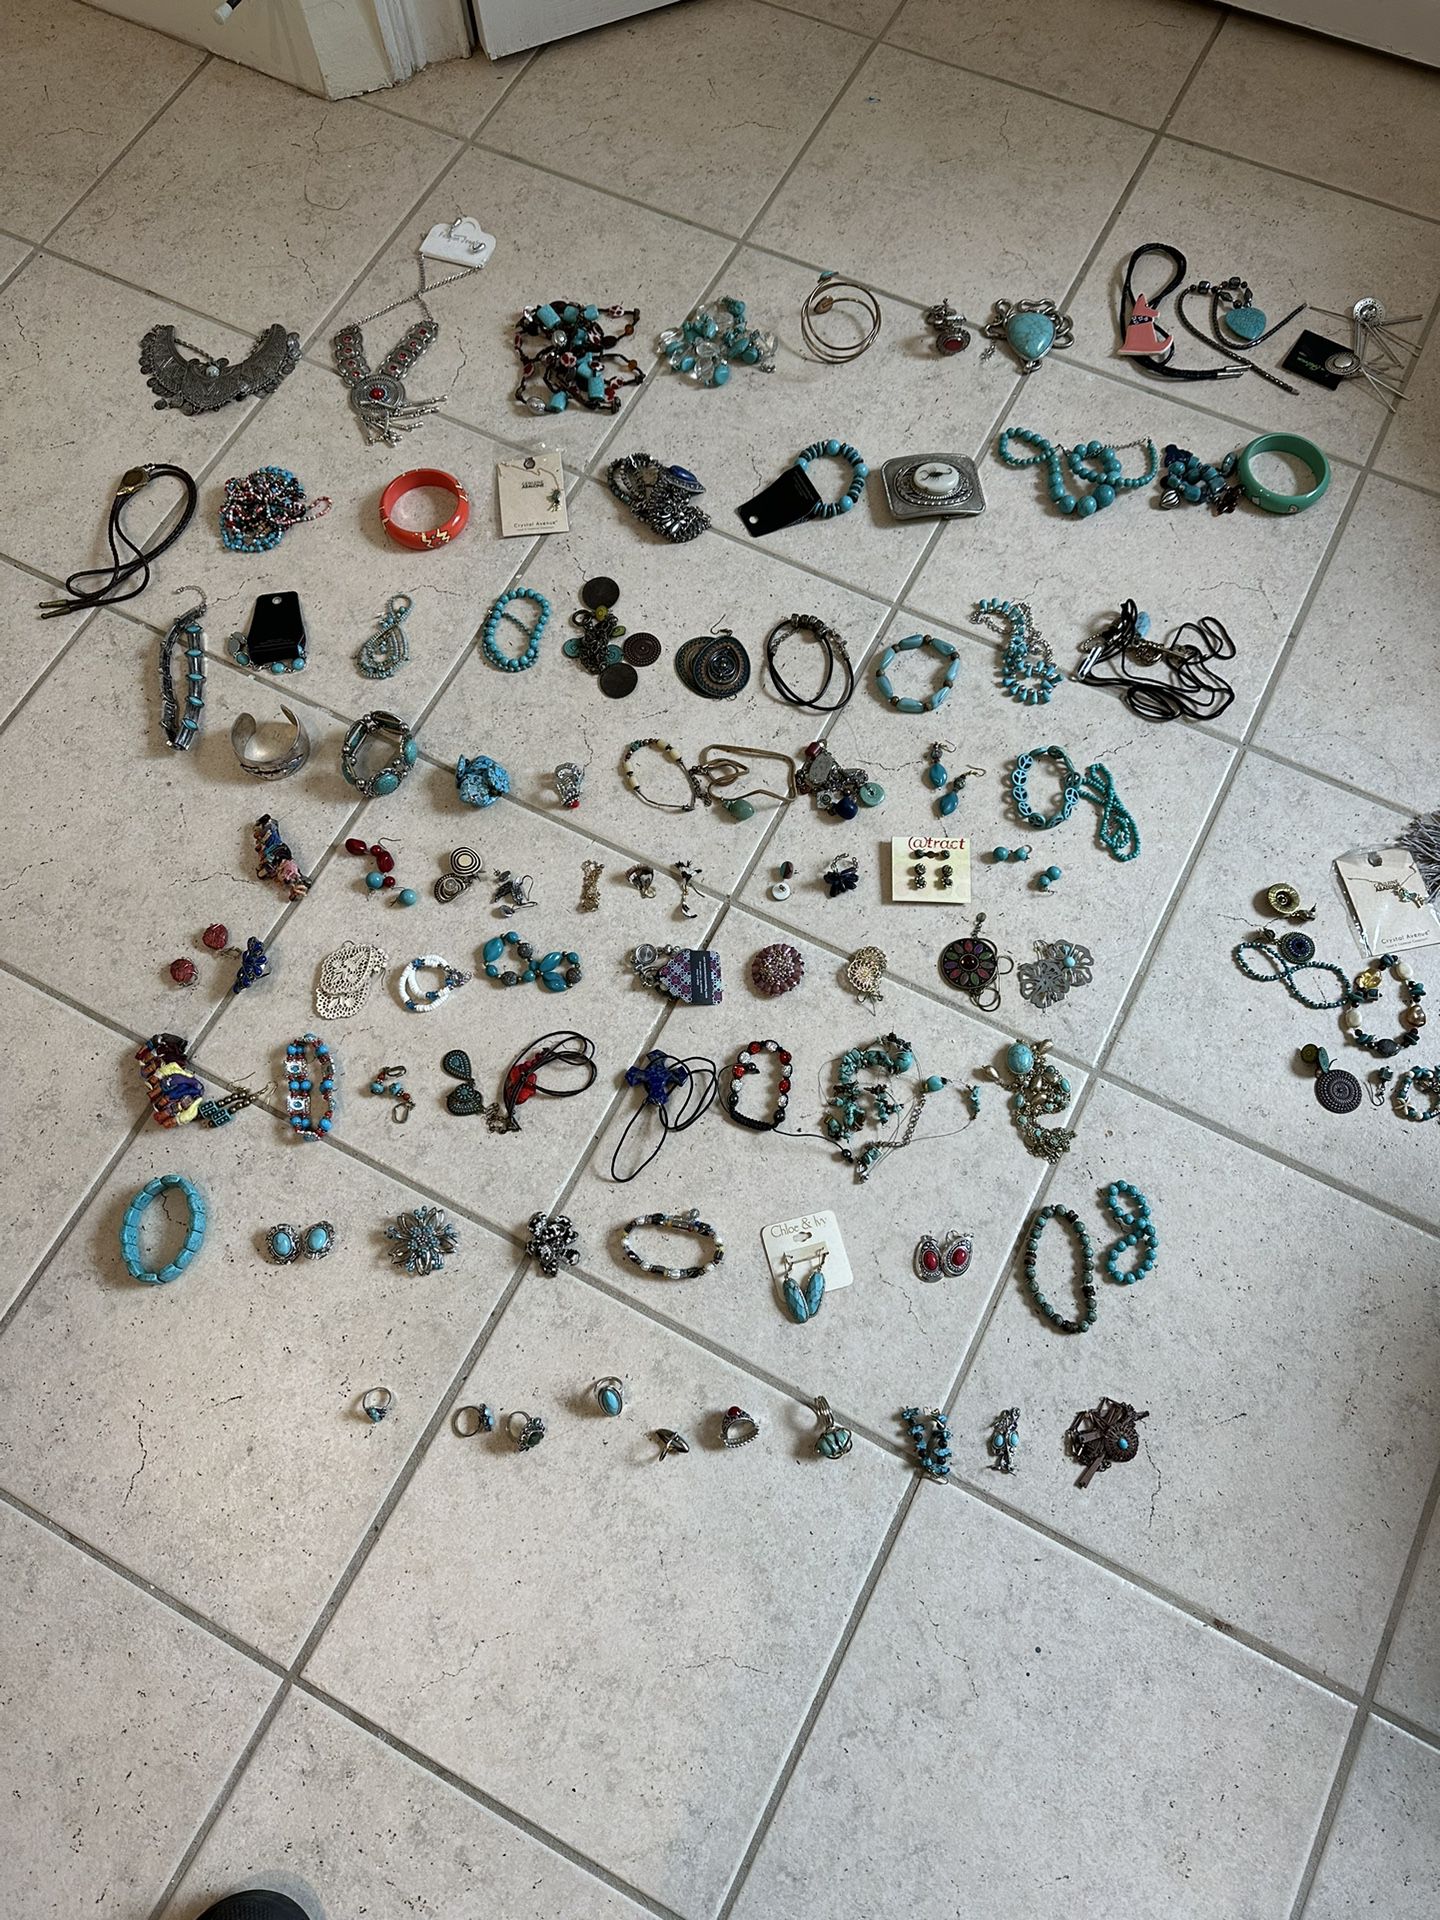 100 pieces Turquoise Colored Jewelry Items- Rings, Earrings, Necklaces and More